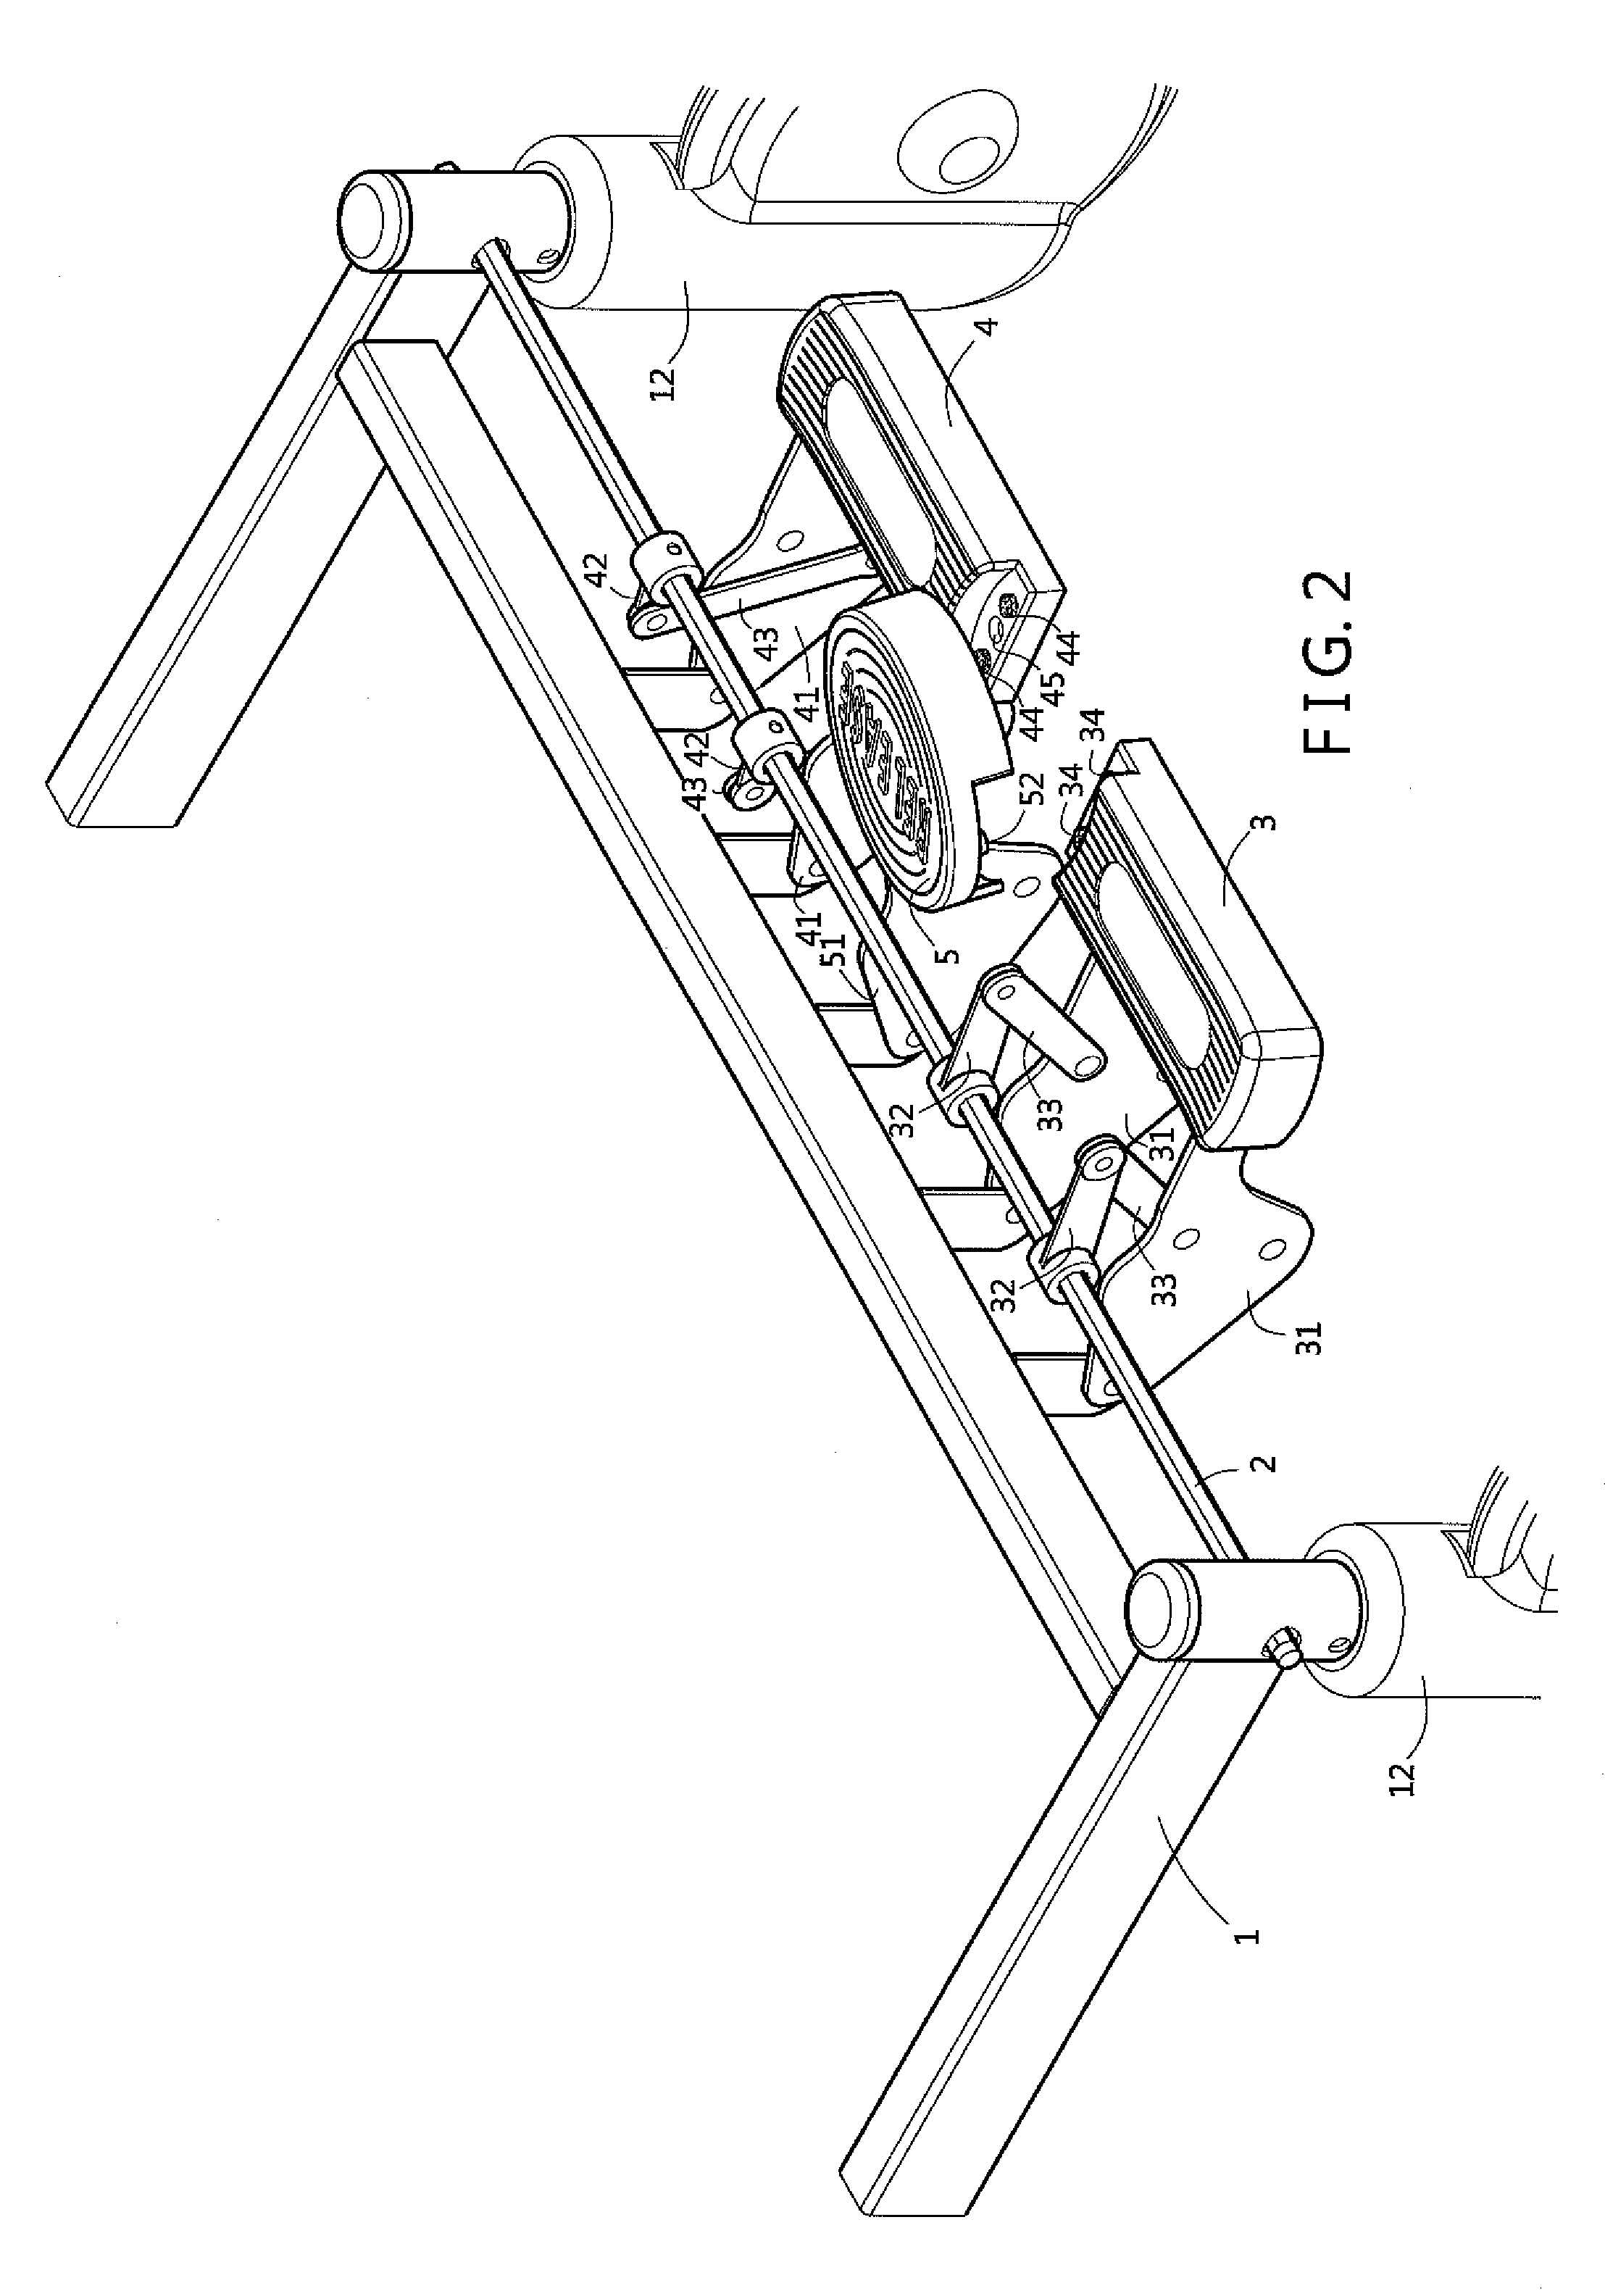 Motion control apparatus for hospital bed